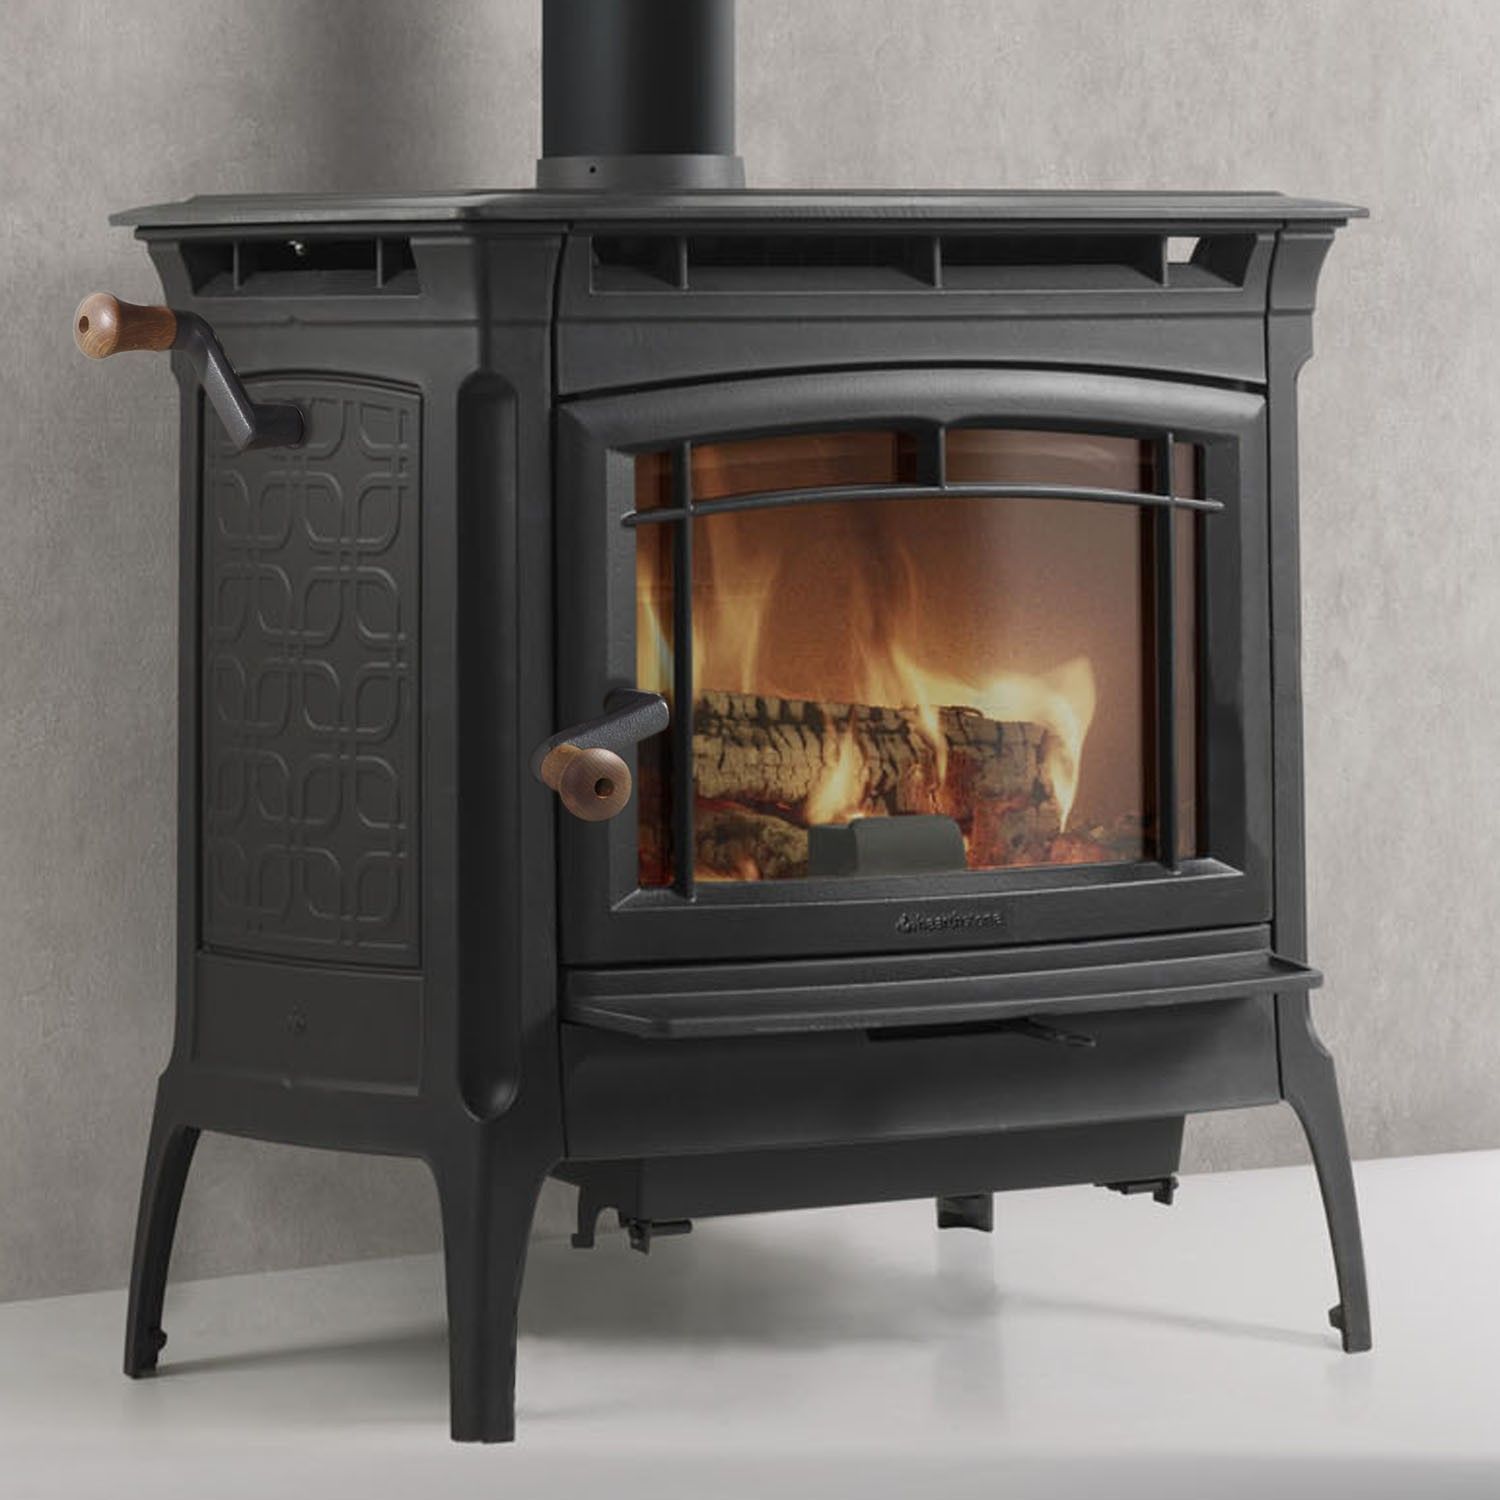 Burning Wood In Fireplace Luxury Pin by Do Wrocklage Harp On Home